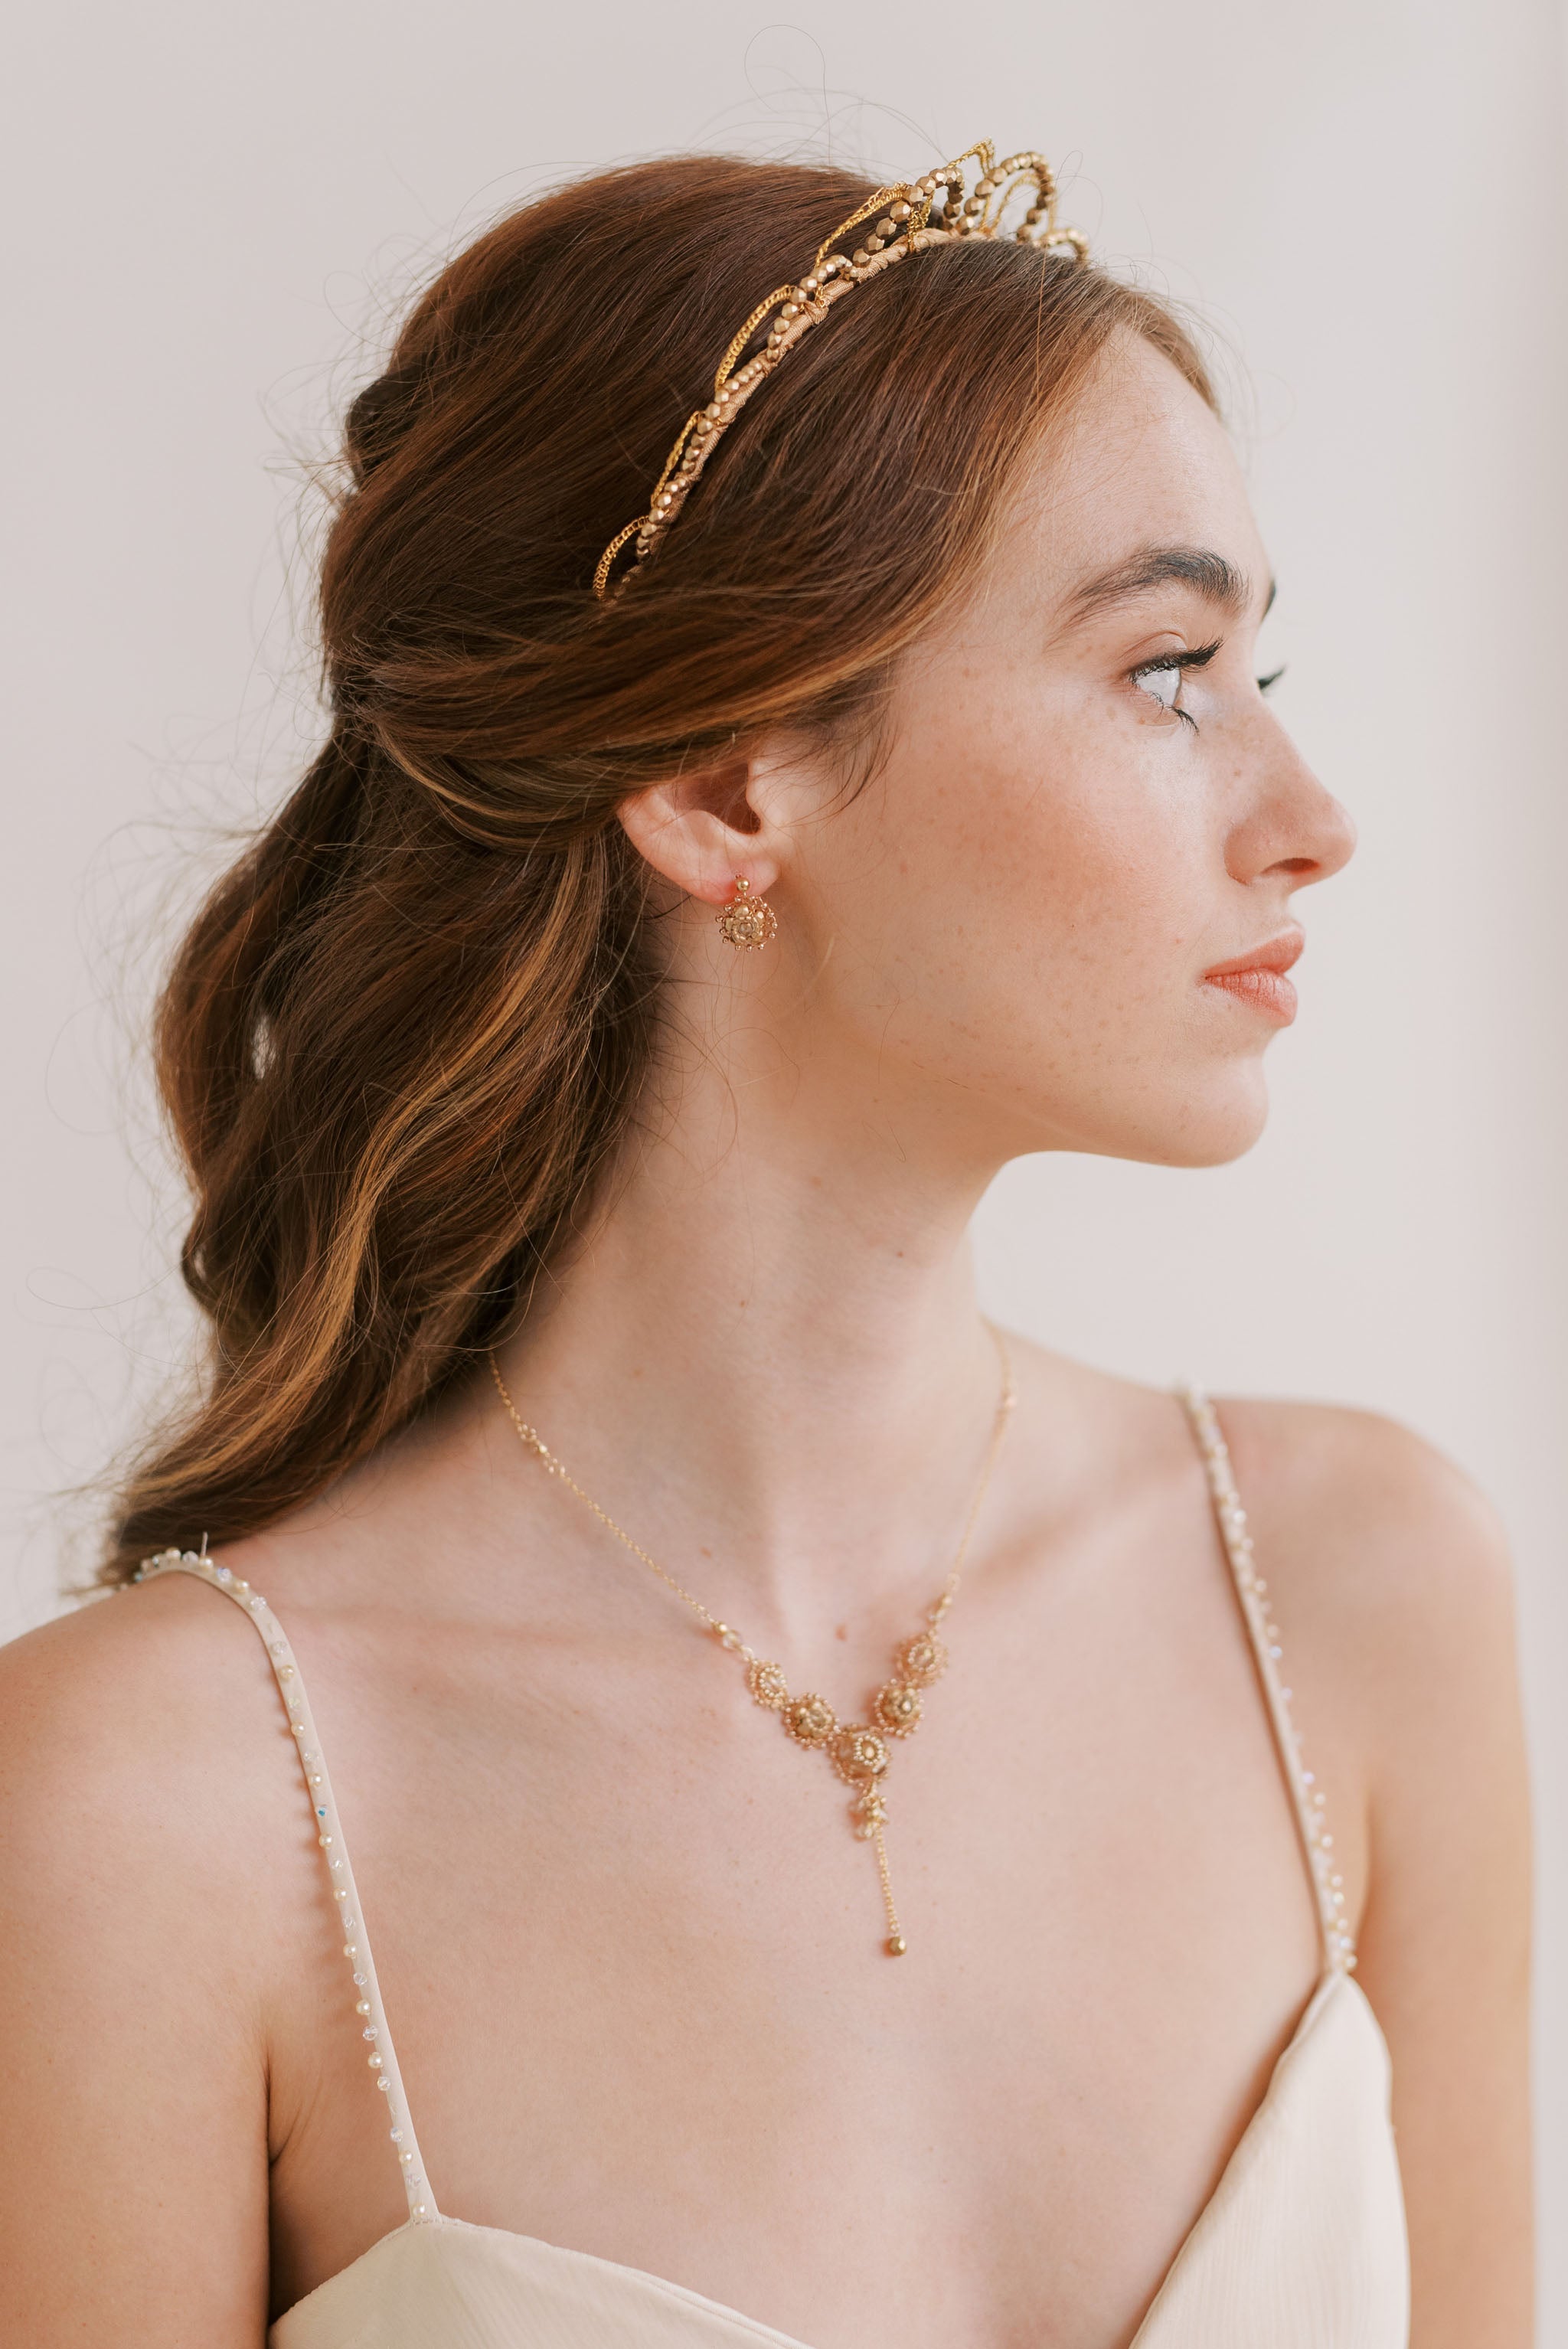 Coordinating accessories and jewellery in golden tones by Judith Brown Bridal